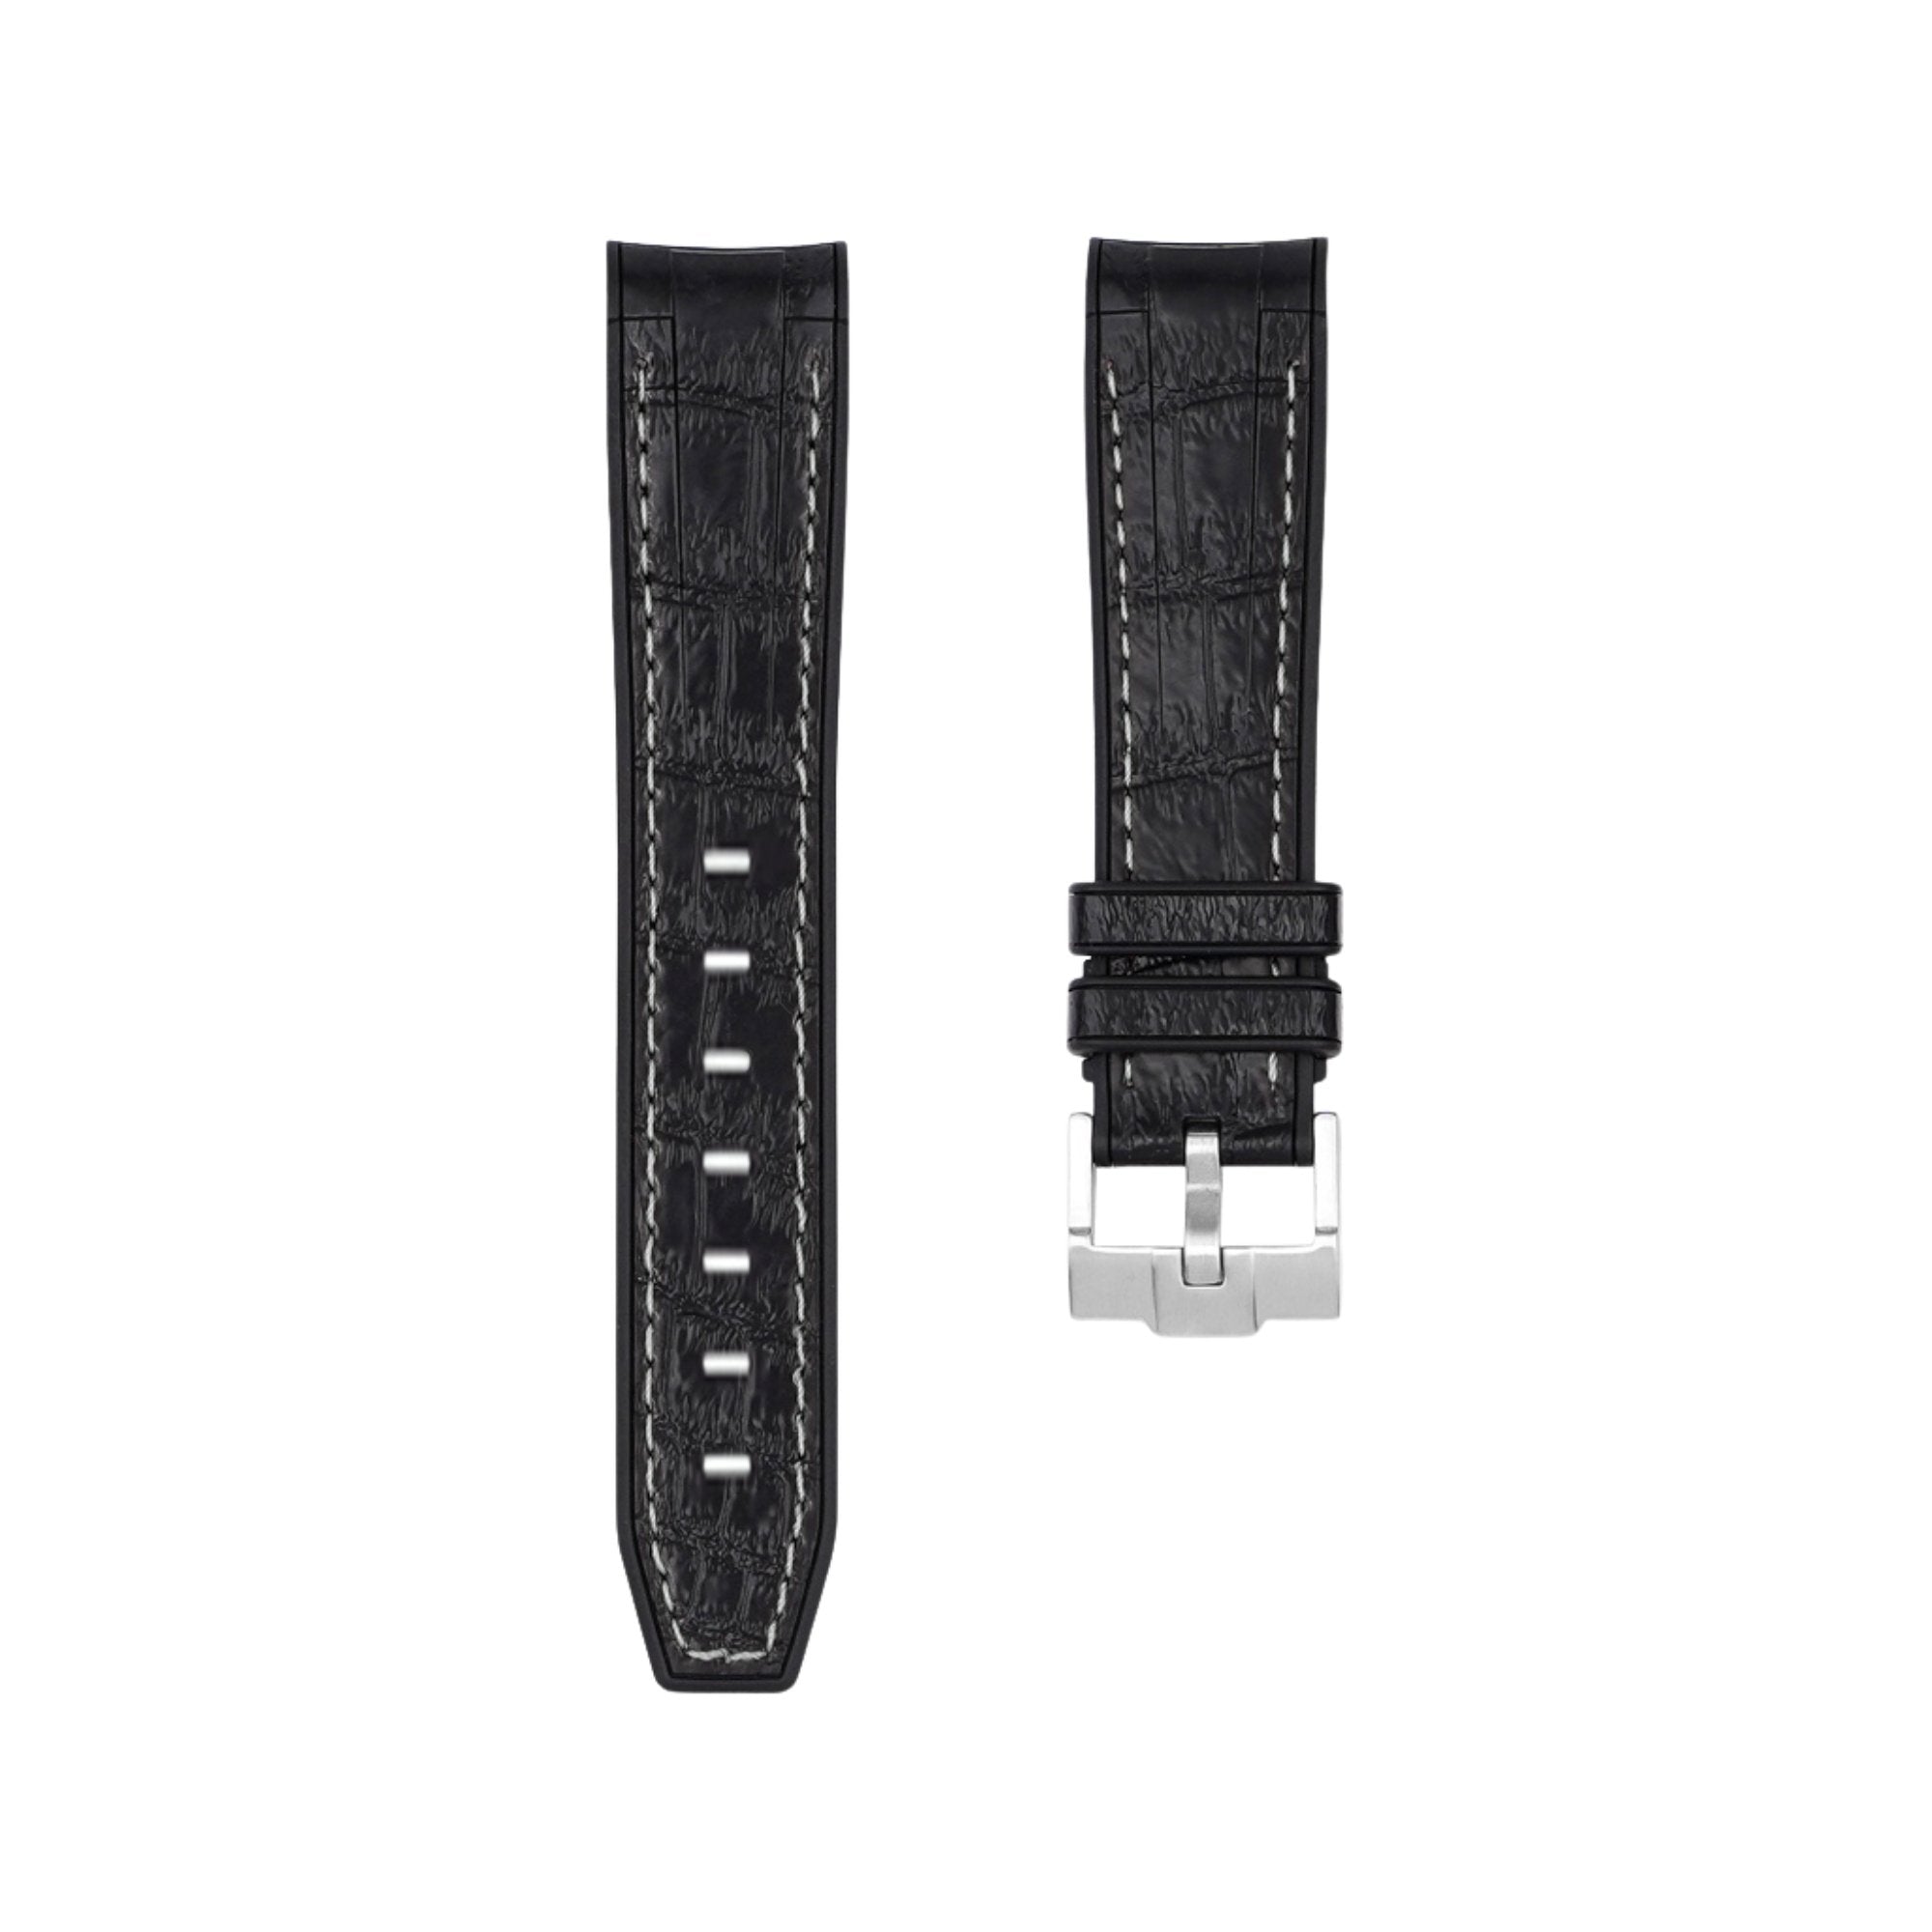 Alligator Embossed Curved End Premium Silicone Strap - Compatible with Omega x Swatch - Black with White Stitch (2406) -StrapSeeker